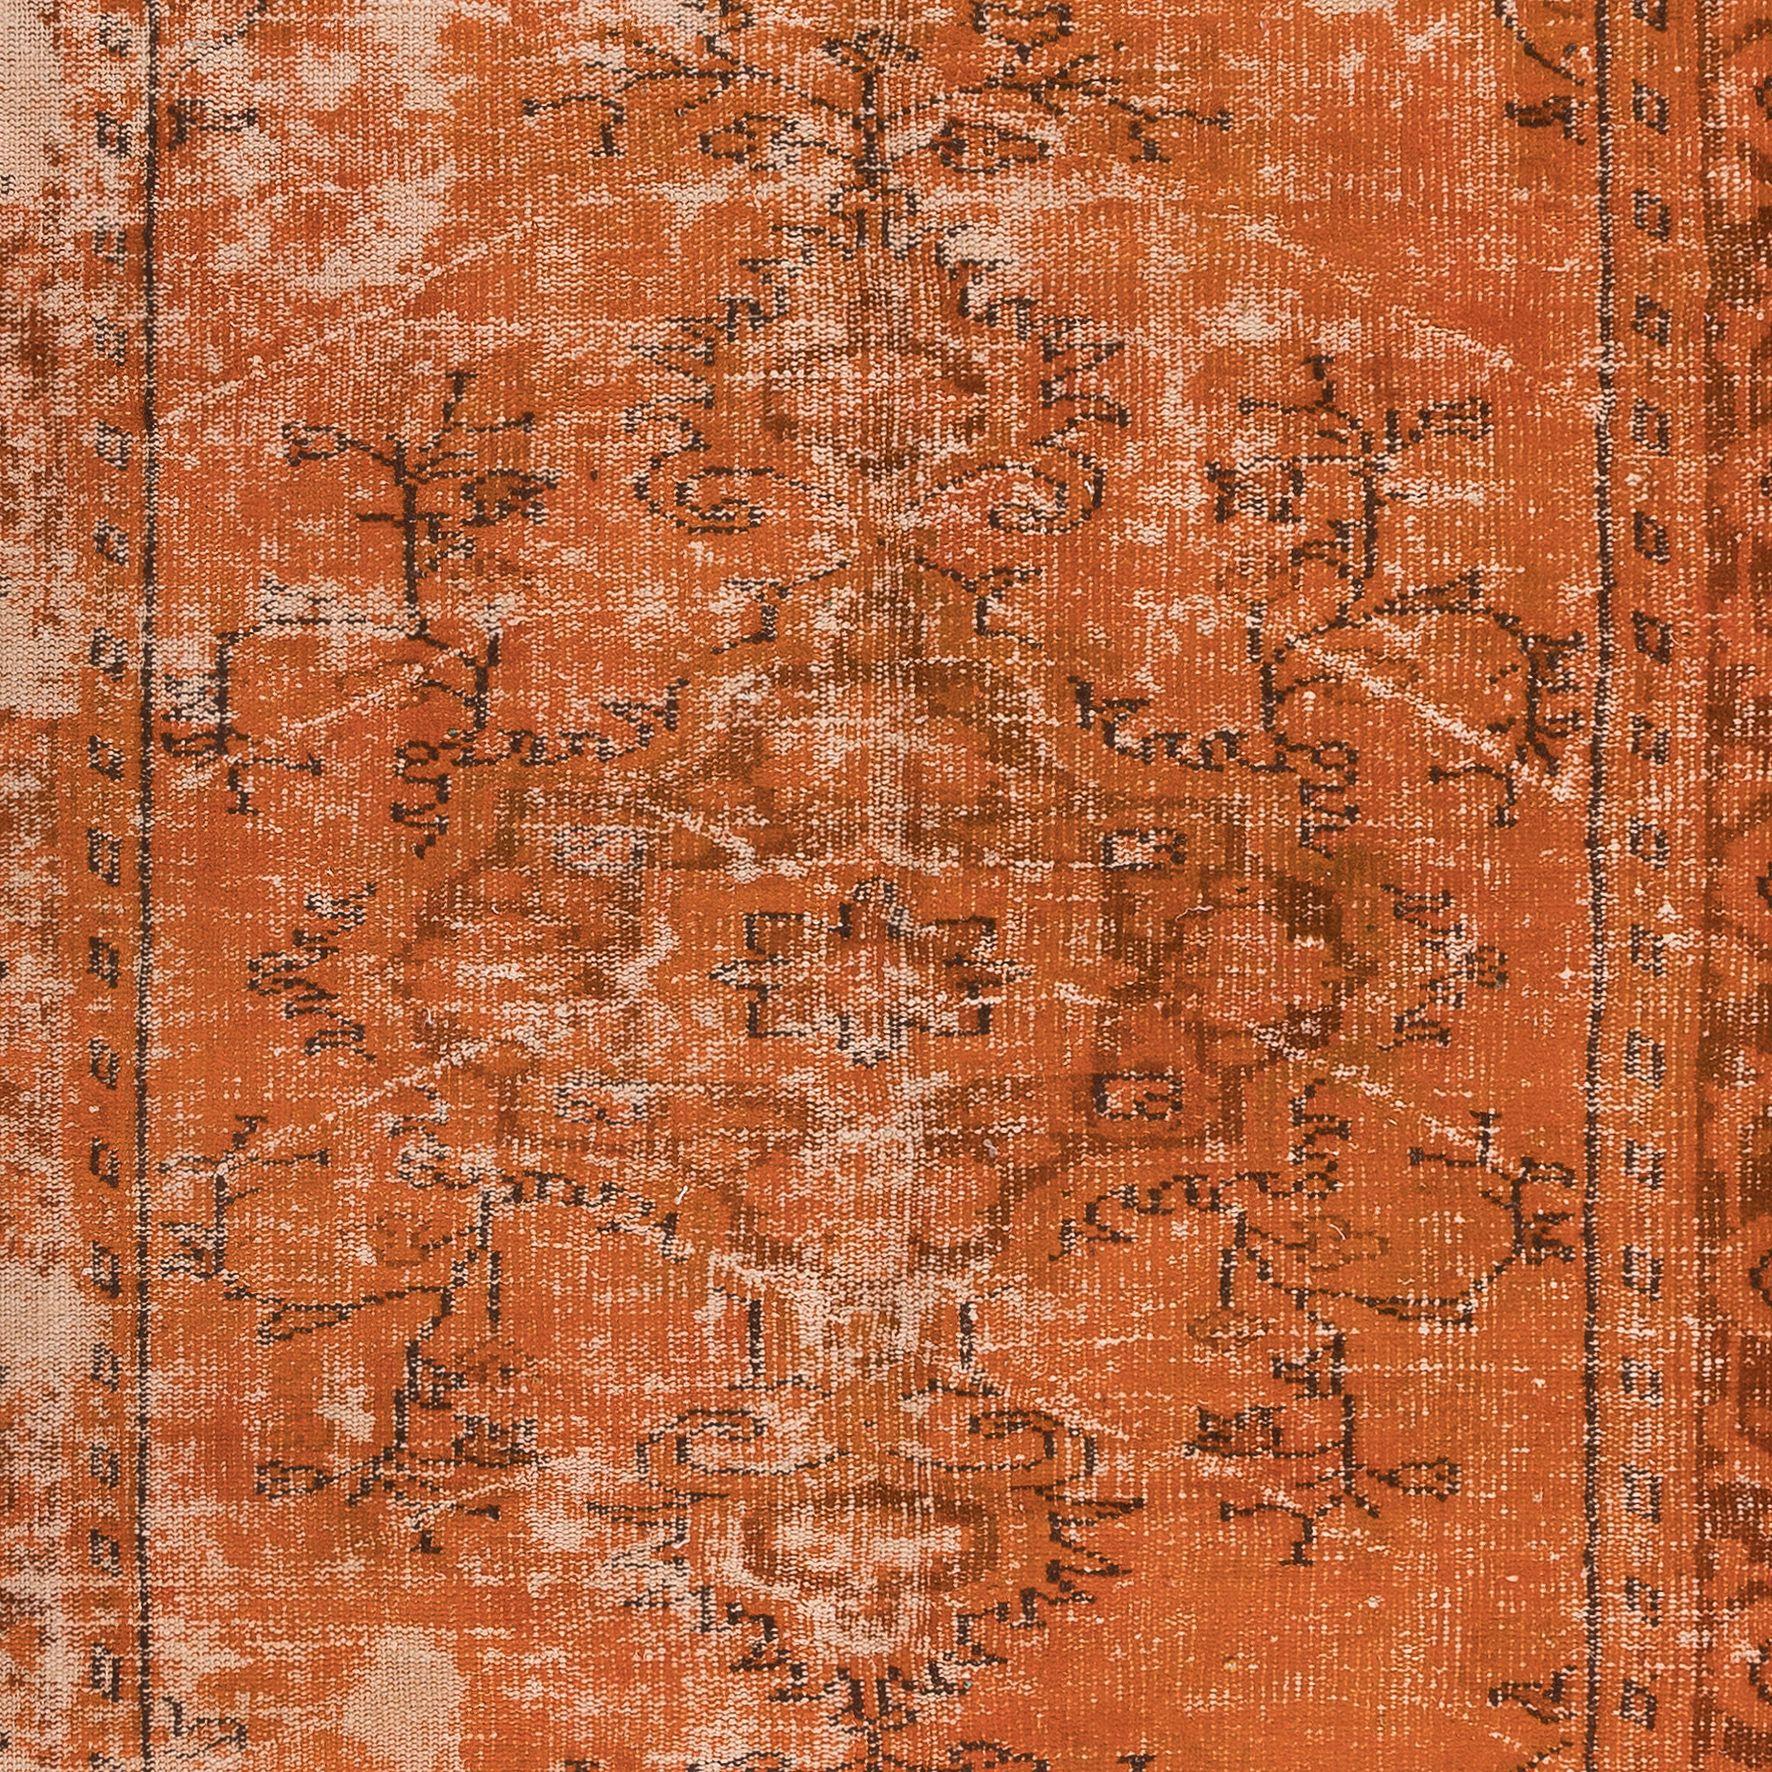 5.4x8.4 Ft Handmade Turkish Vintage Rug with Shabby Chic Style in Orange Tones In Good Condition For Sale In Philadelphia, PA